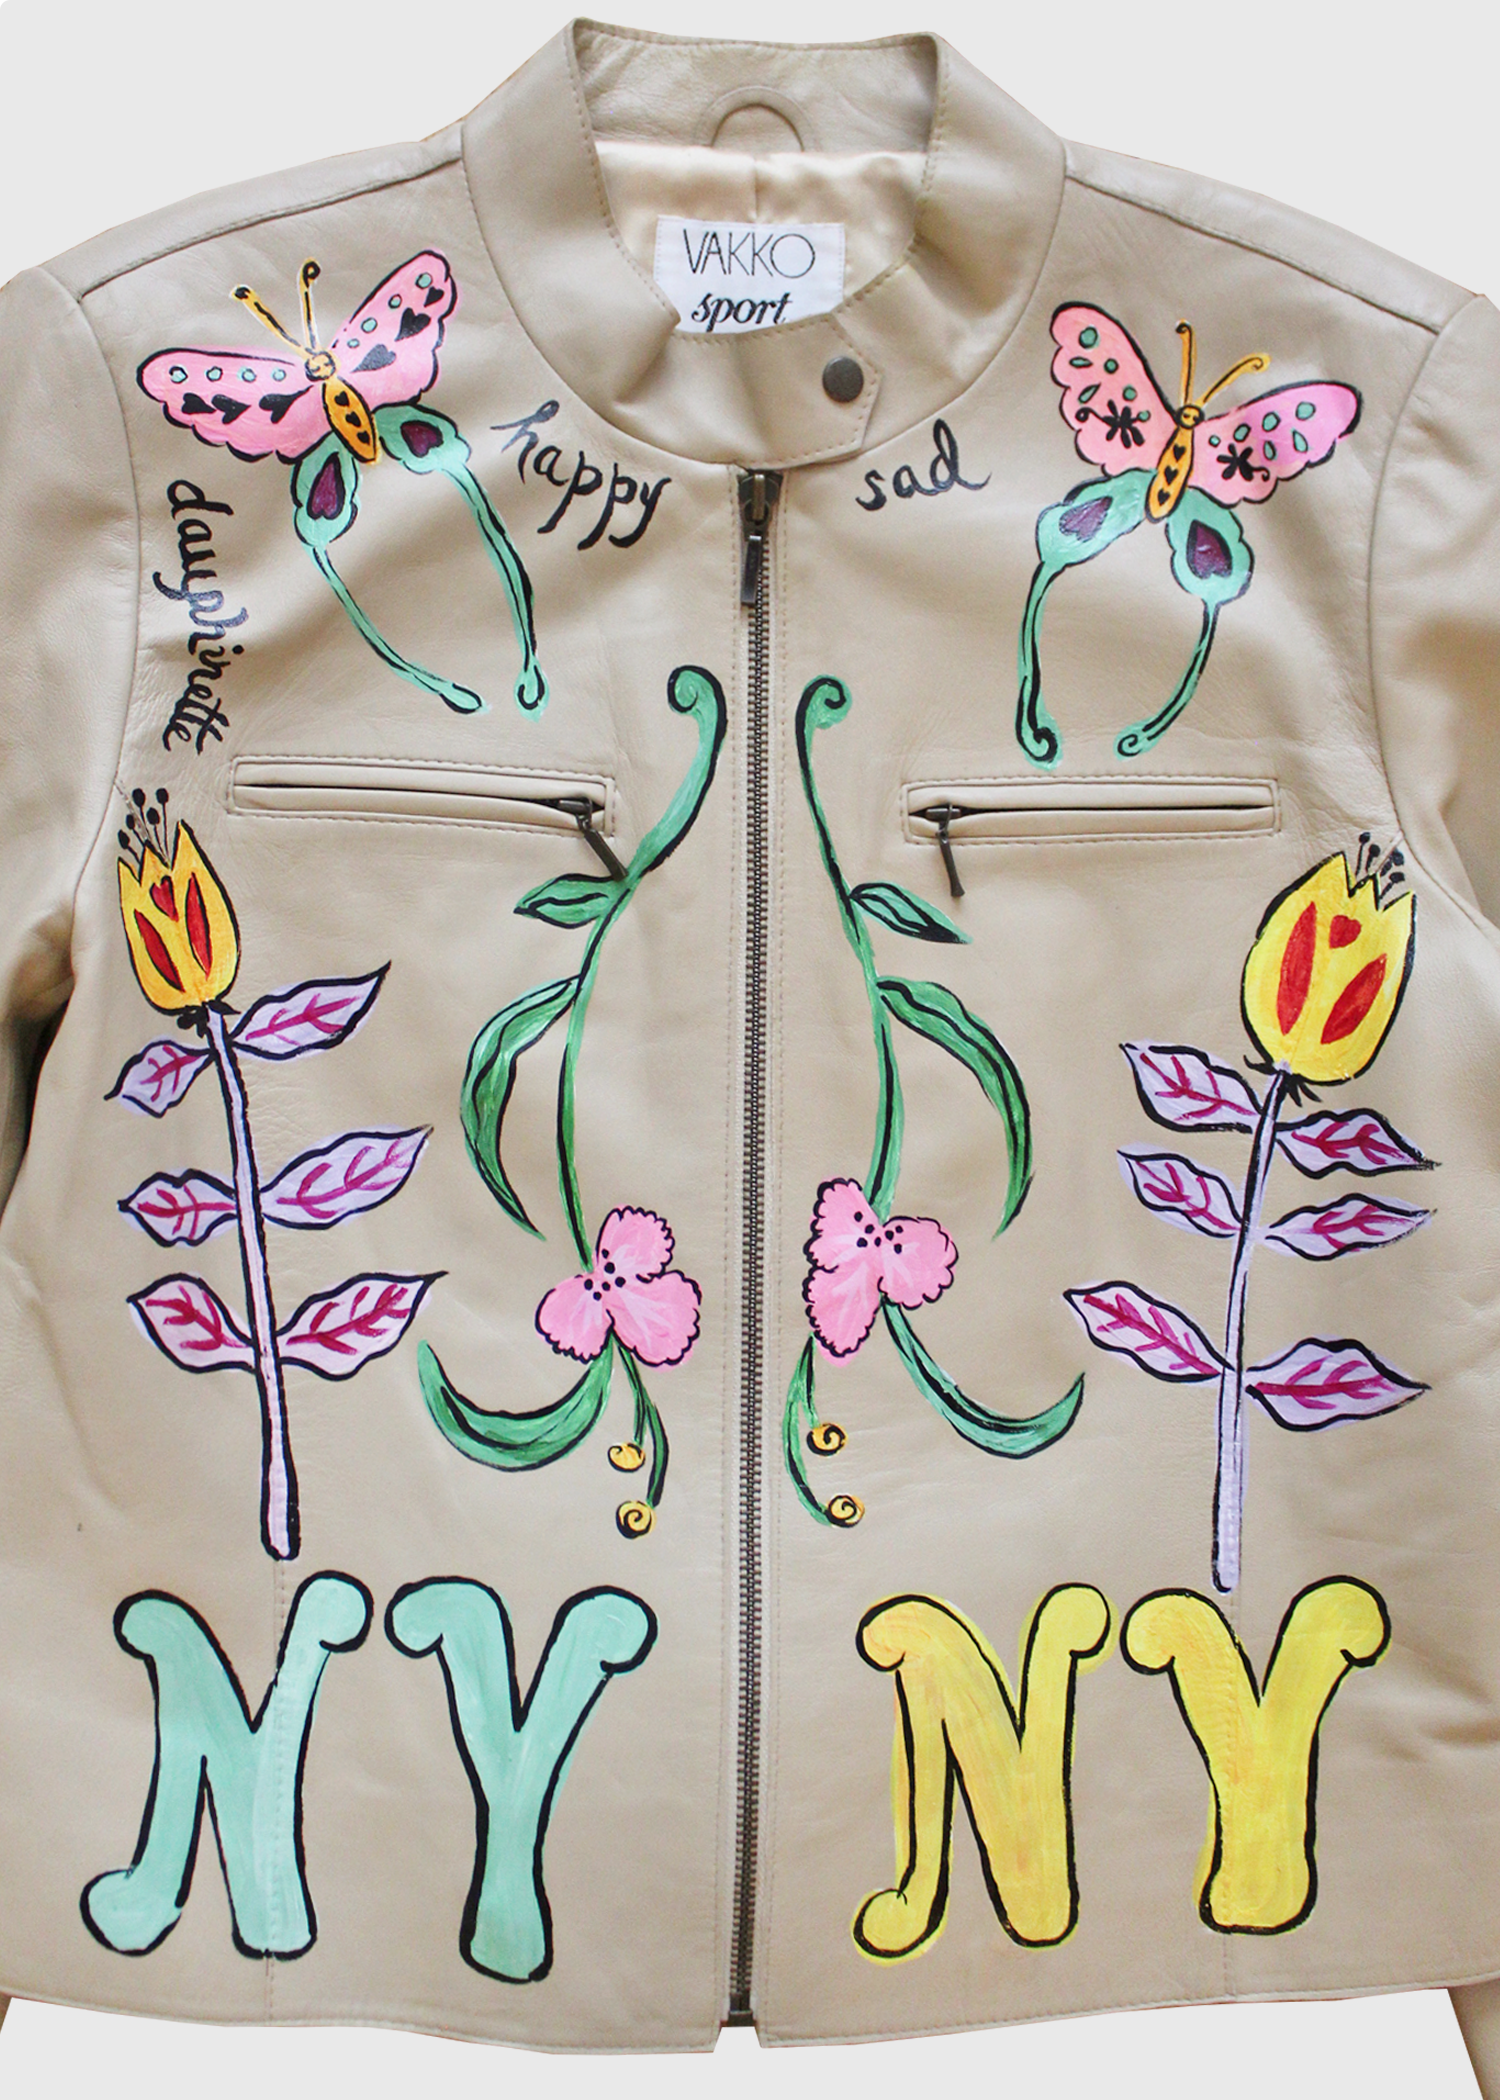 a detail image of the Hand-painted 1980s leather jacket featuring an elaborate amalgamation of colorful butterflies, alien flowers, the words "happy" and "sad", and one mint green and one yellow "NY" painted on either side of the jackets center front zipper.